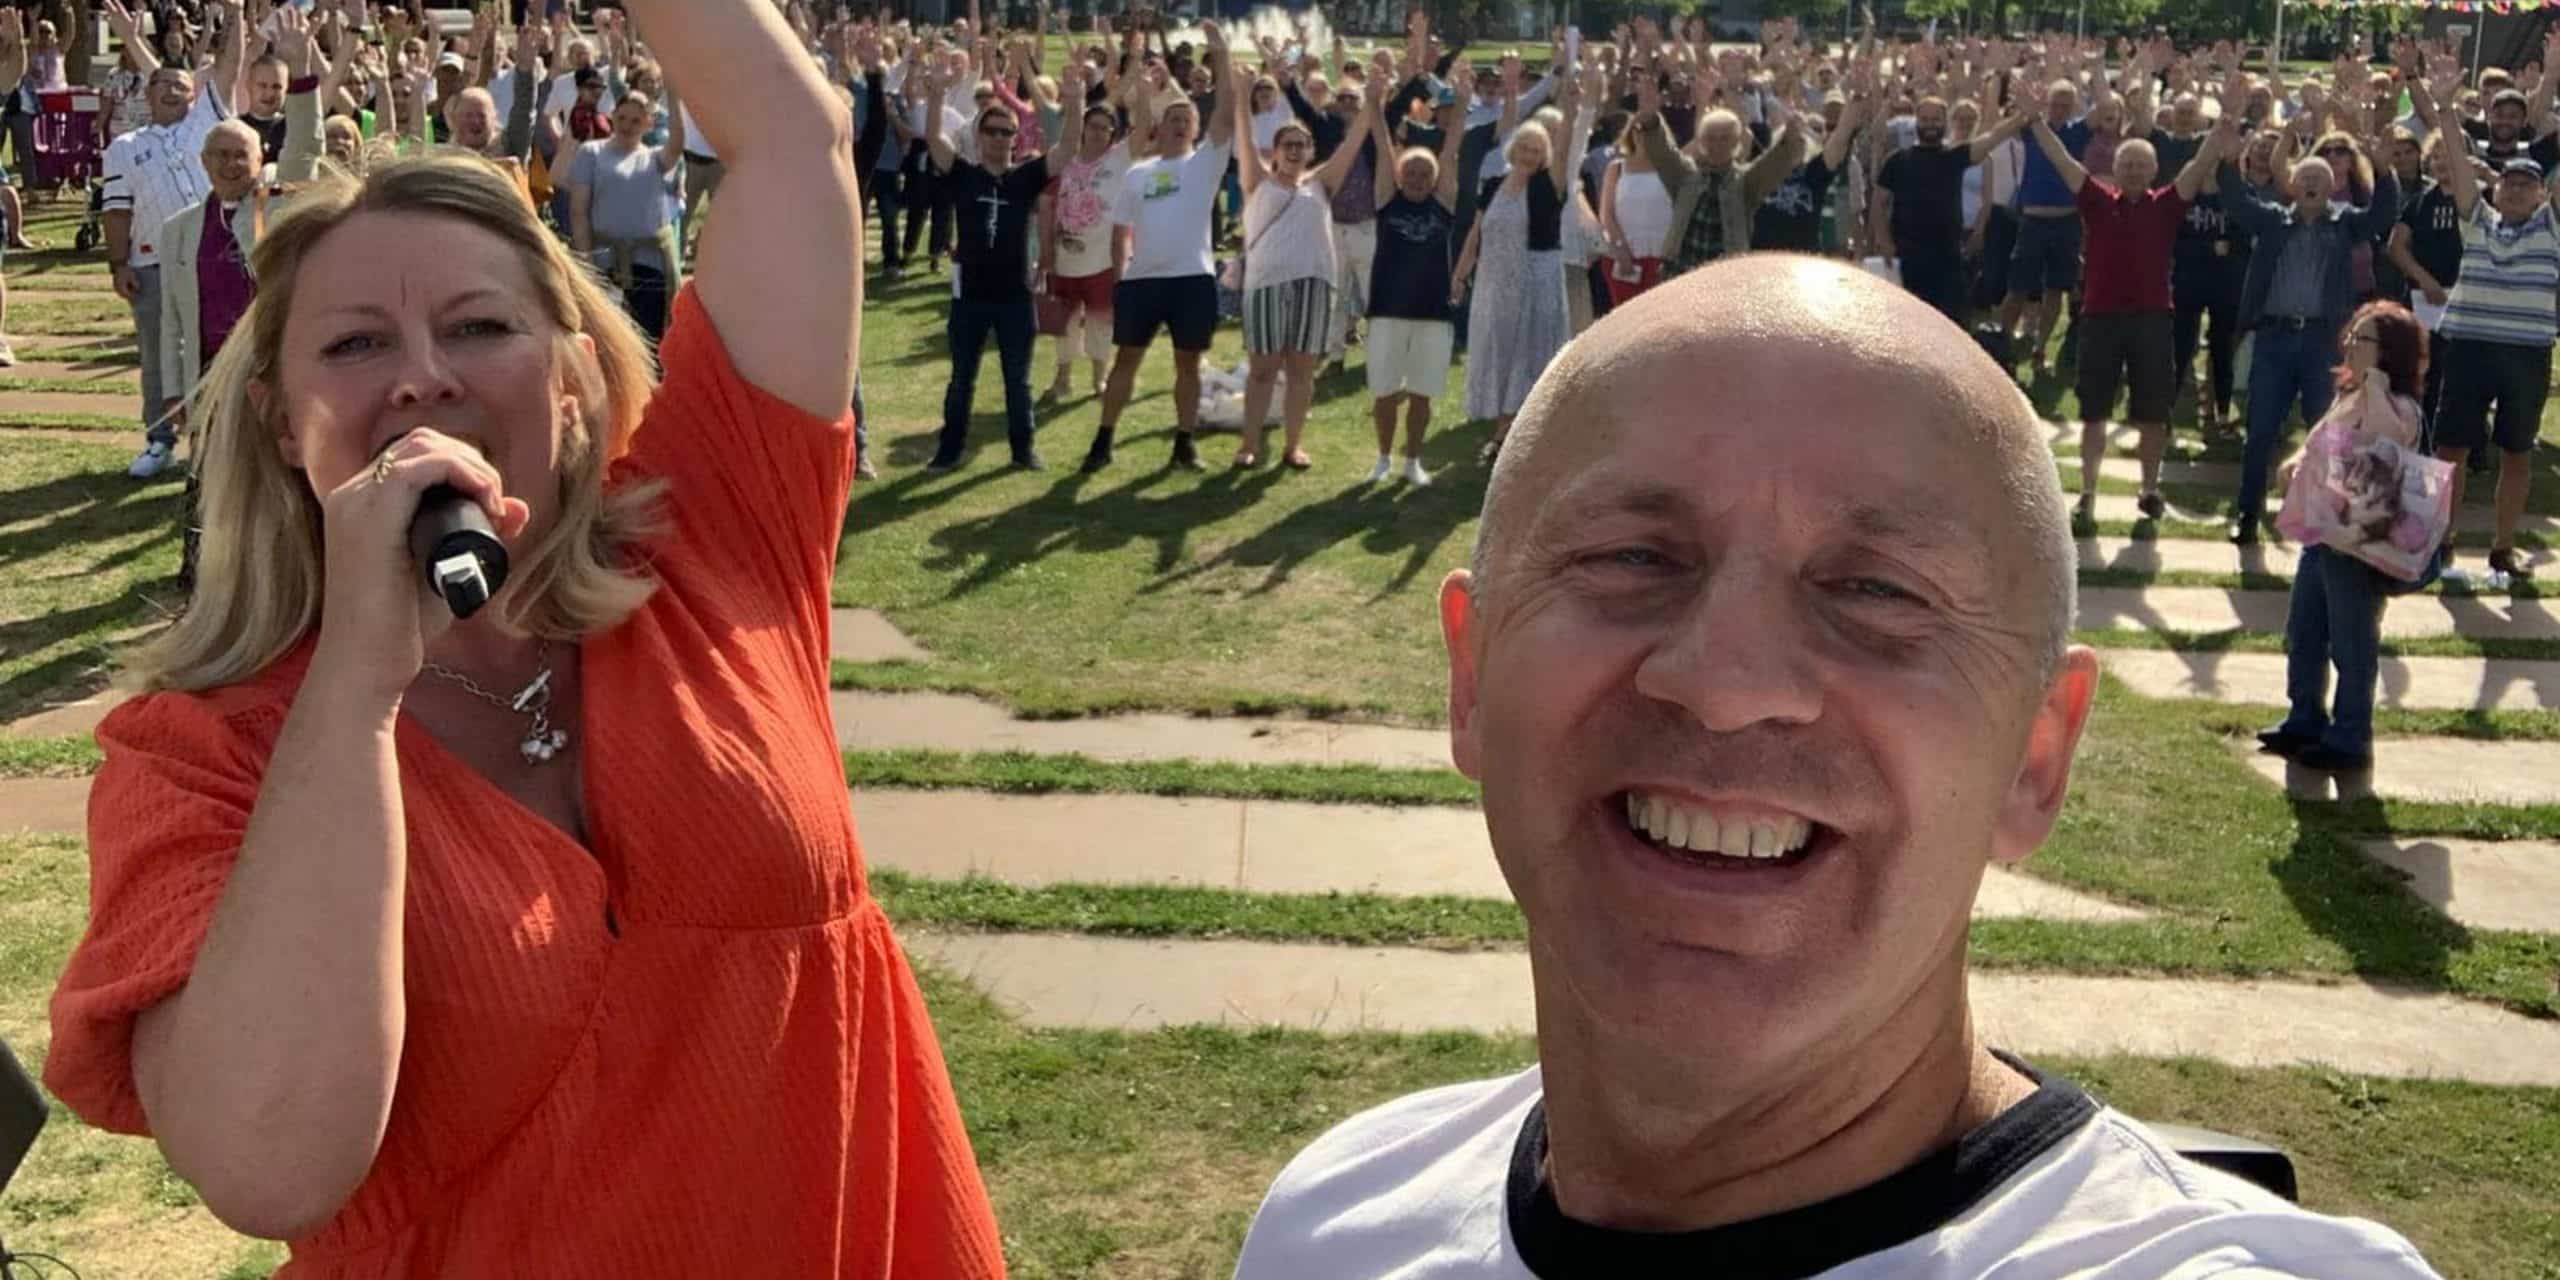 Leaders on stage at a Festival Teesside prayer event at Middlesbrough Centre Square, taking a selfie of themselves and the large crowd behind them